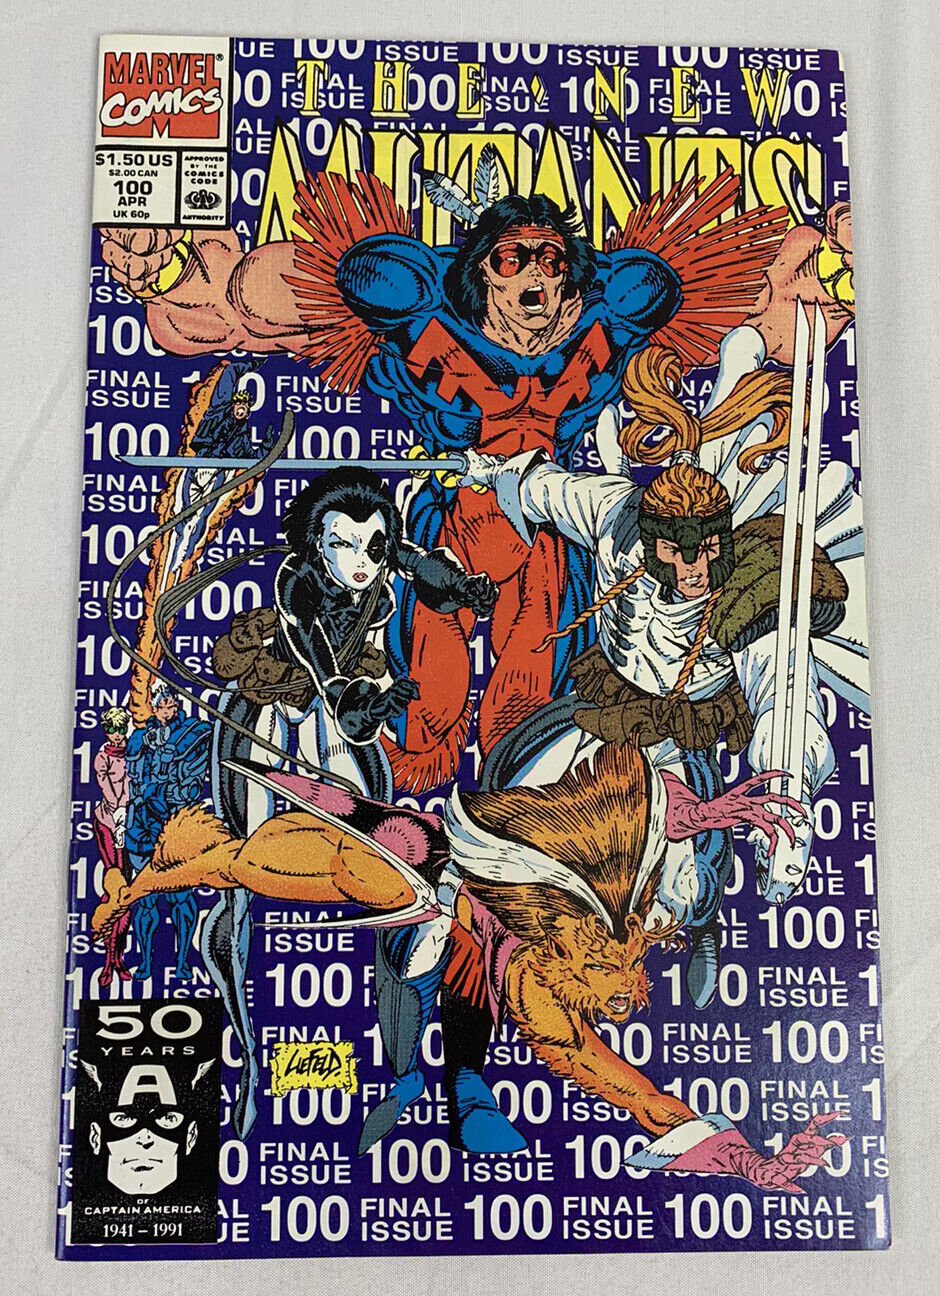 The New Mutants #100 - Signed By Rob Liefeld - Excellent Condition - Rare Comic